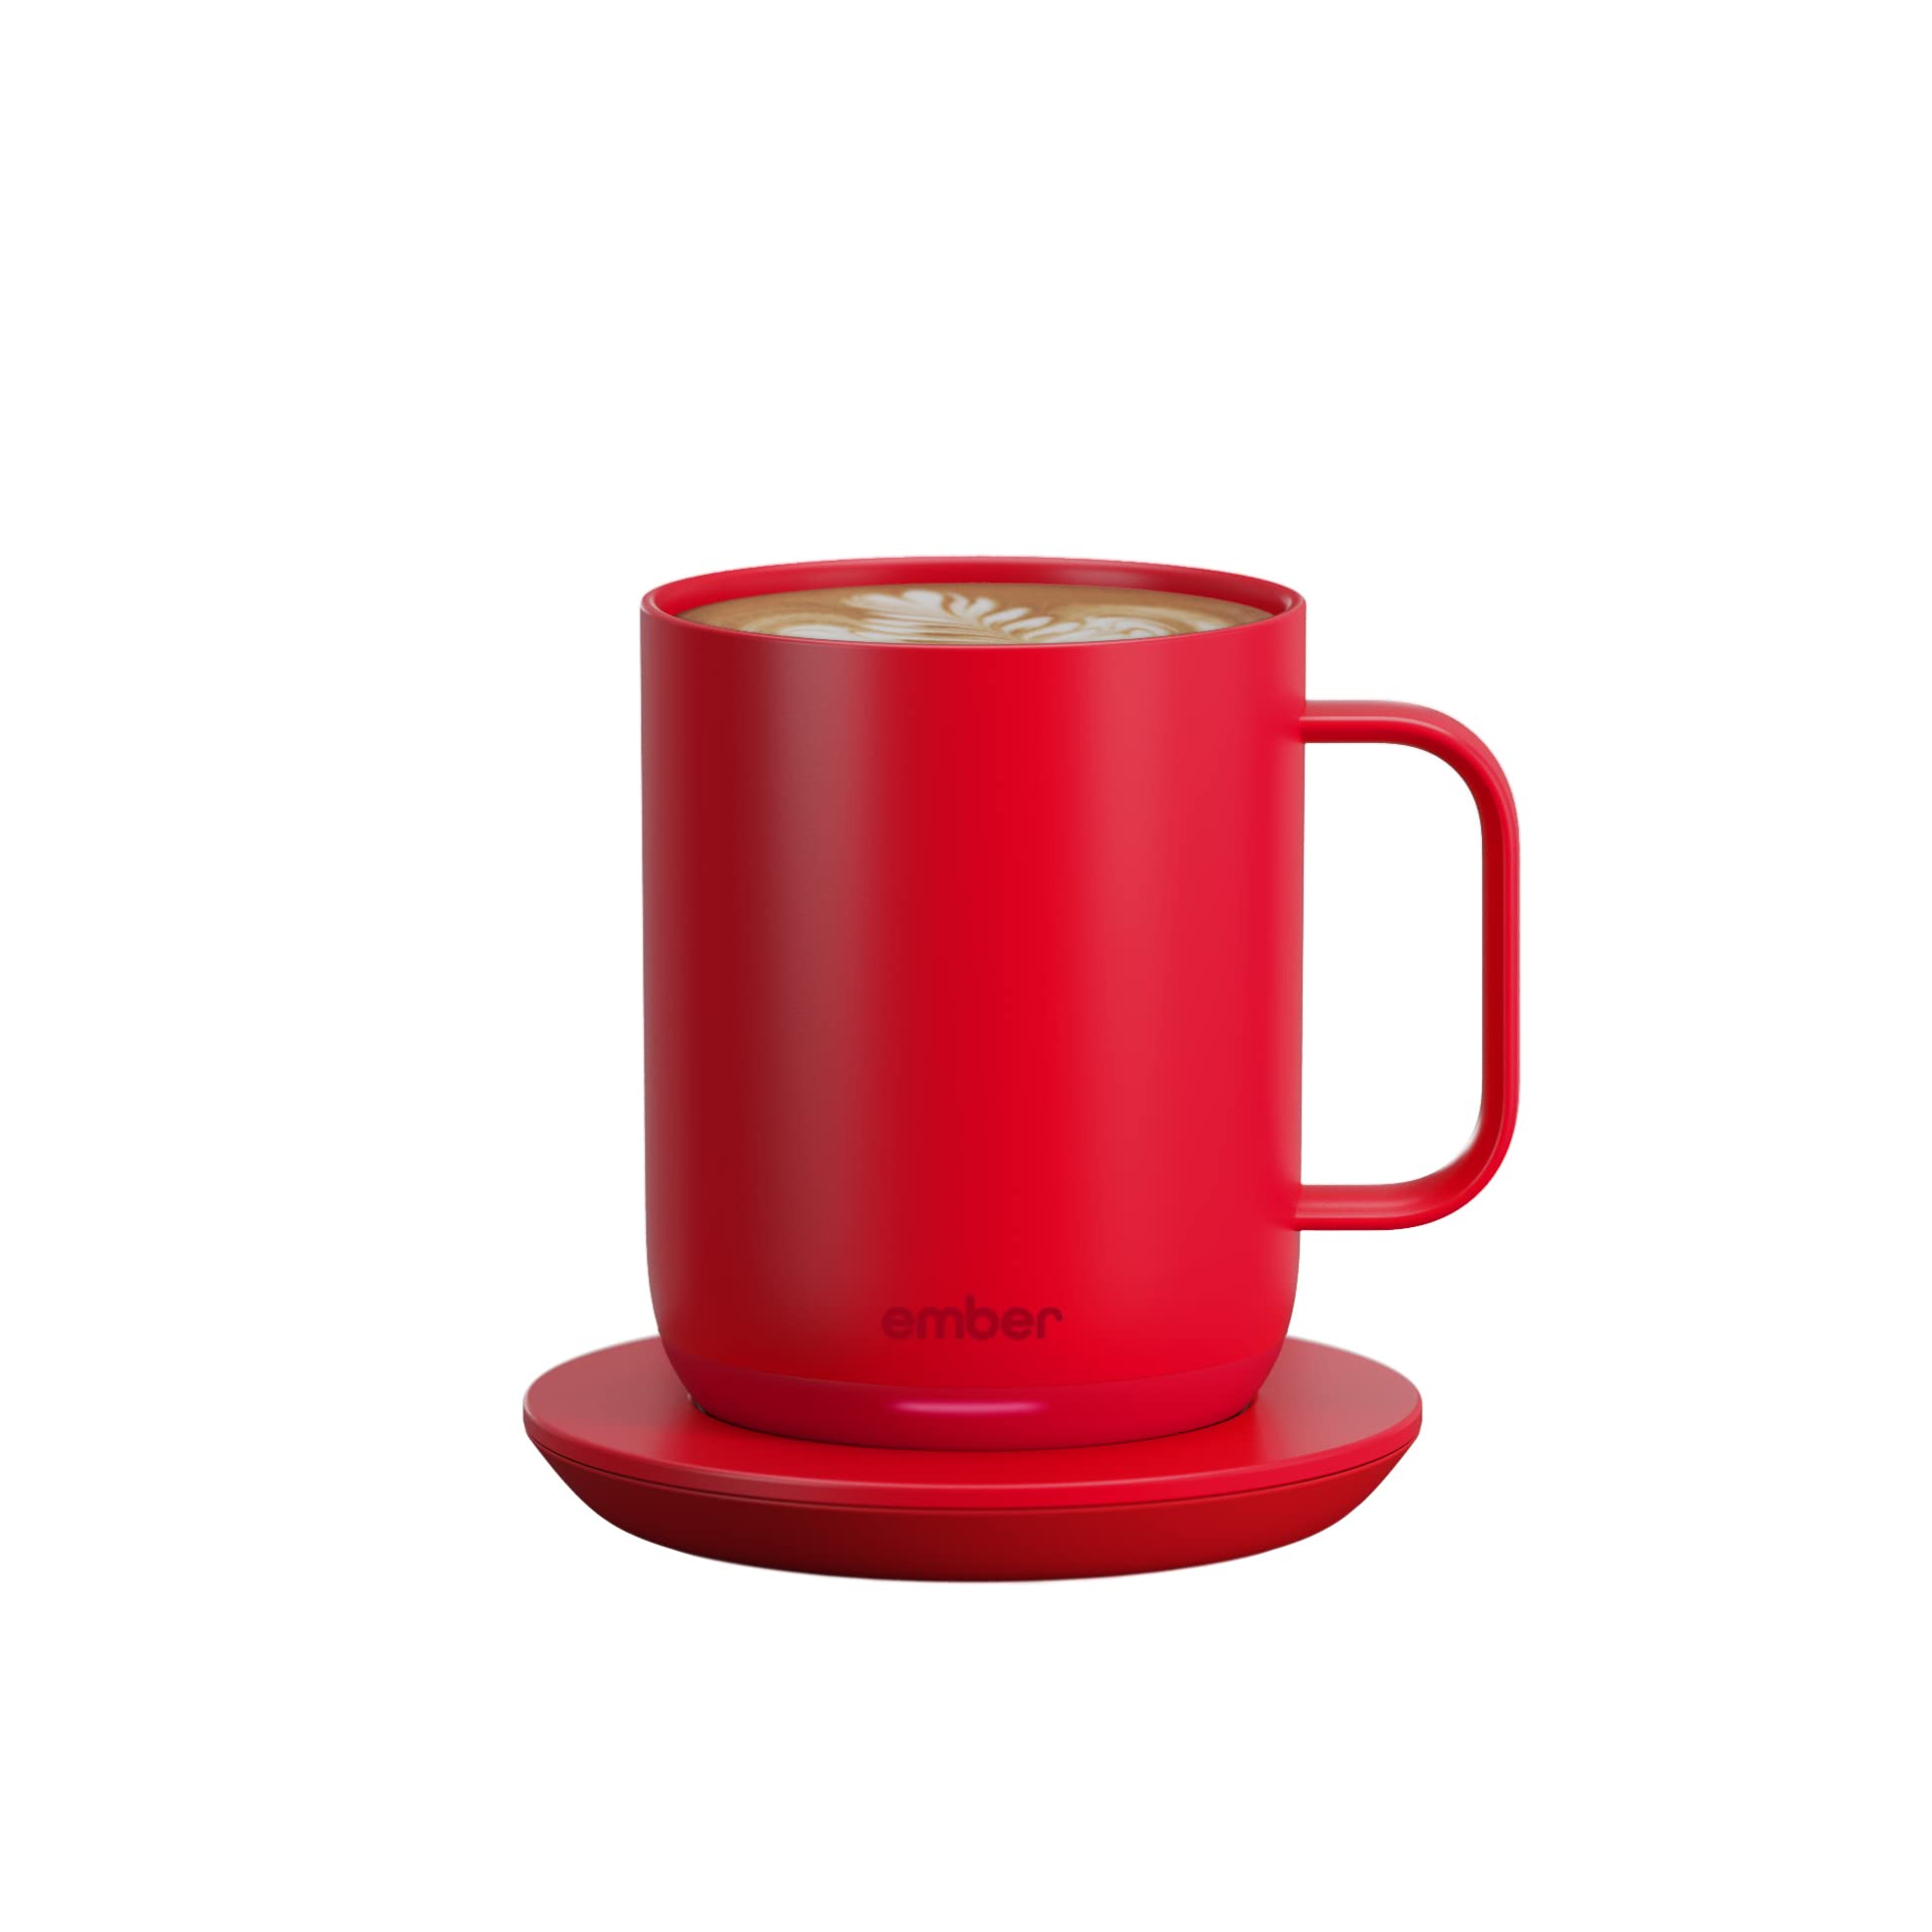 Ember - Temperature Control Smart Mug 2, 14 Oz, App-Controlled Heated Coffee Mug with 80 Min Battery Life and Improved Design, (Product) RED